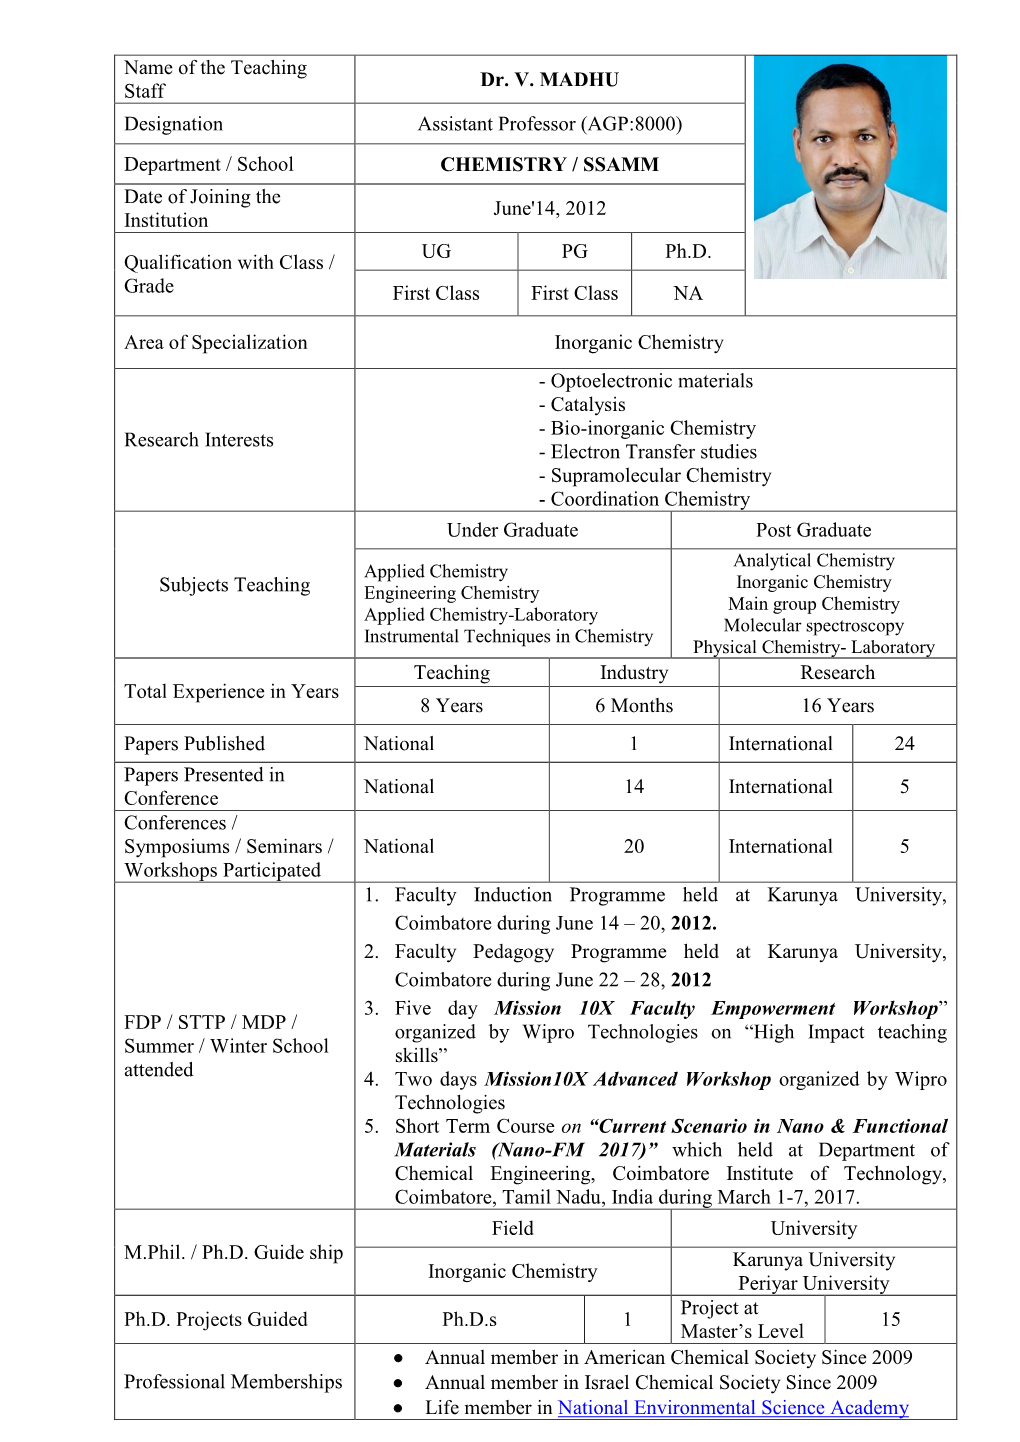 Name of the Teaching Staff Dr. V. MADHU Designation Assistant